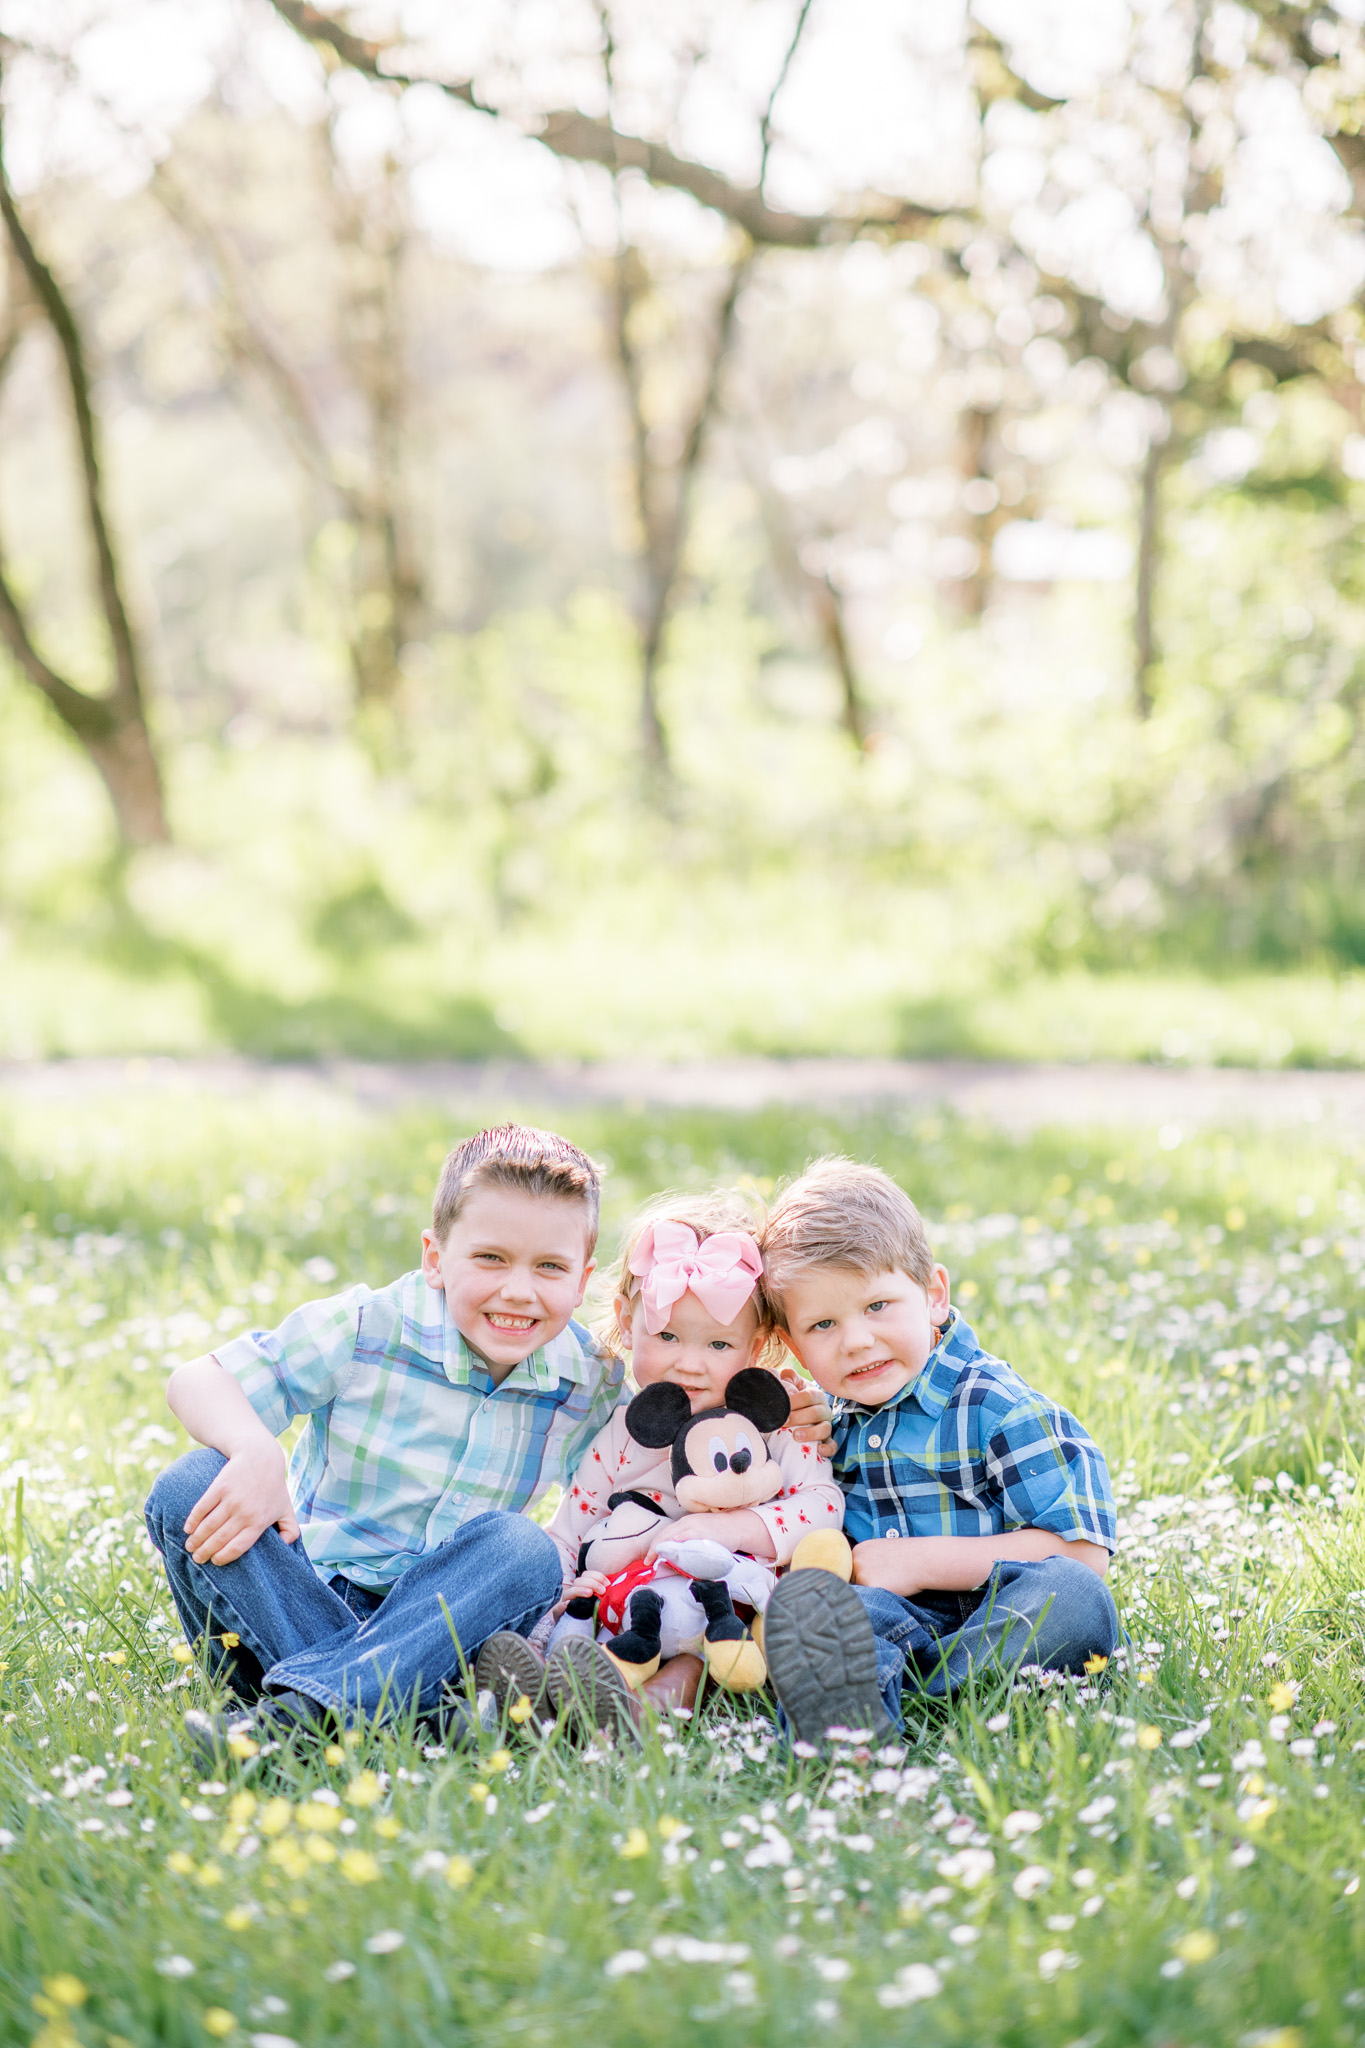 A two, four, and six year old sit in the spring grass with their arms around each other. The youngest, a girl, is in between her two older brothers while she hugs her stuffed Mickey Mouse toy. Small white flowers surround the three kids while the sun is shining through the trees behind them.